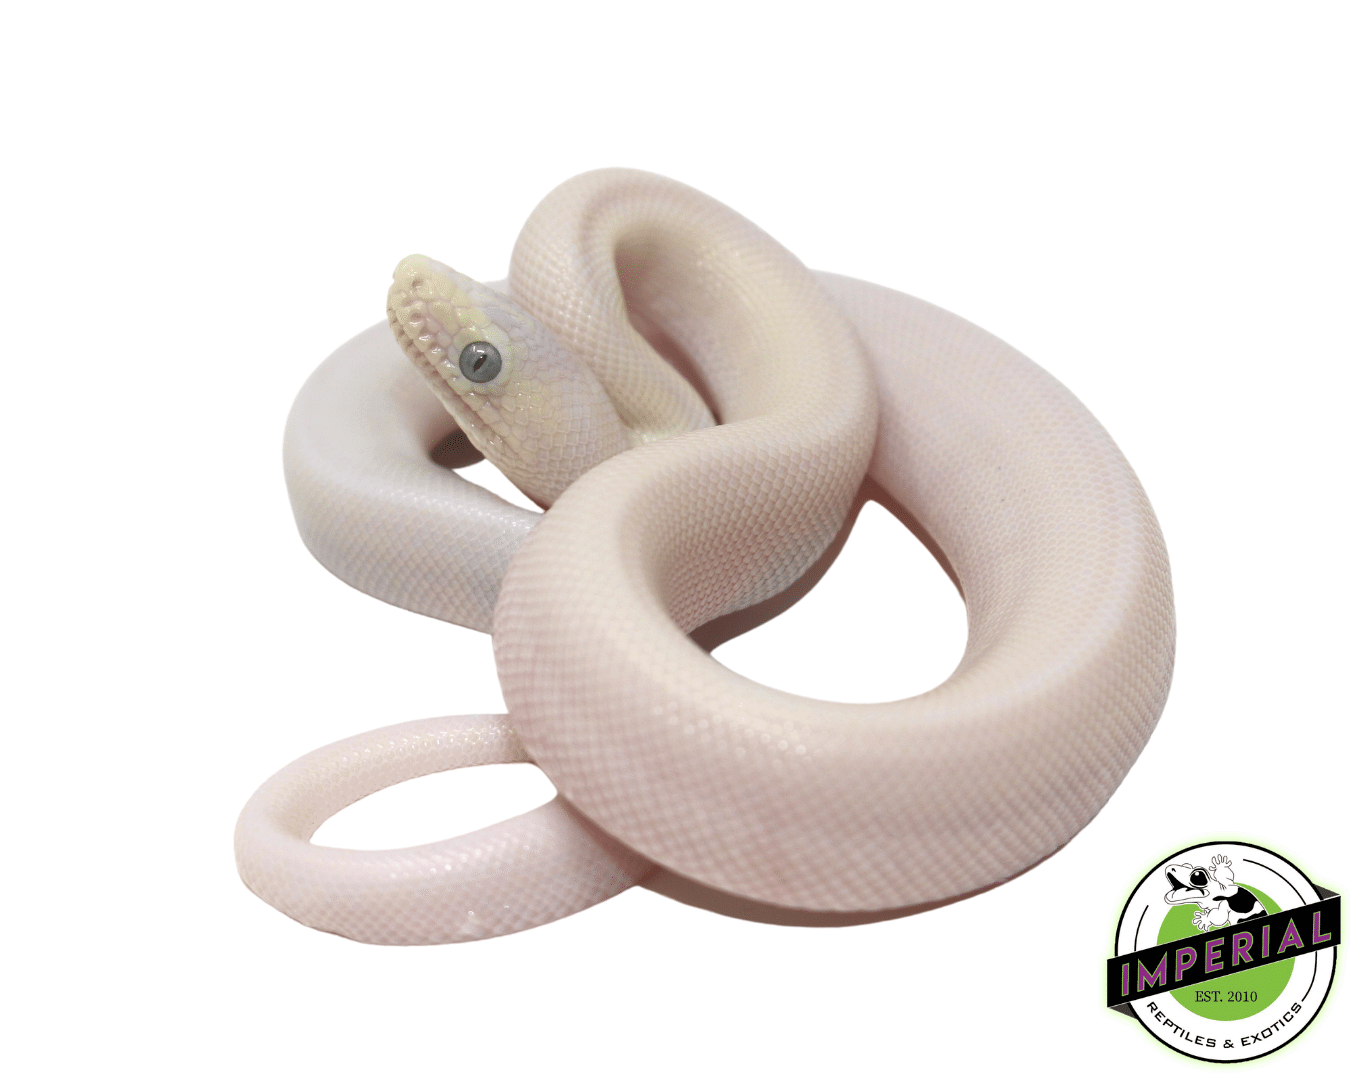 leucistic colombian rainbow boa constrictor for sale, buy reptiles online